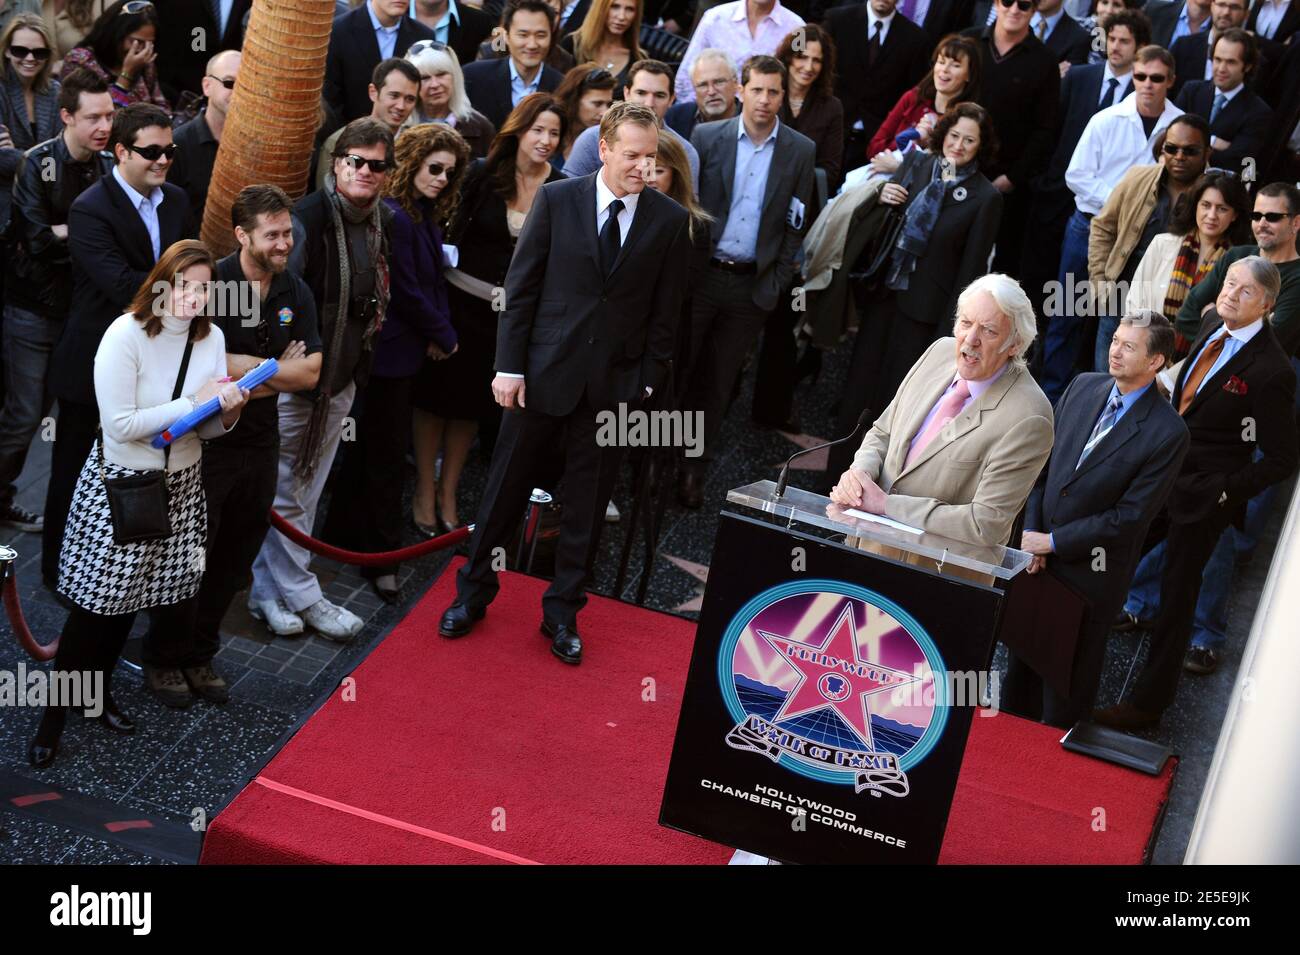 Kiefer Sutherland is honored with the 2,377th star on the walk of fame in Hollywood. Los Angeles, December 9, 2008. (Pictured: Kiefer Sutherland, Donald Sutherland). Photo by Lionel Hahn/ABACAPRESS.COM Stock Photo